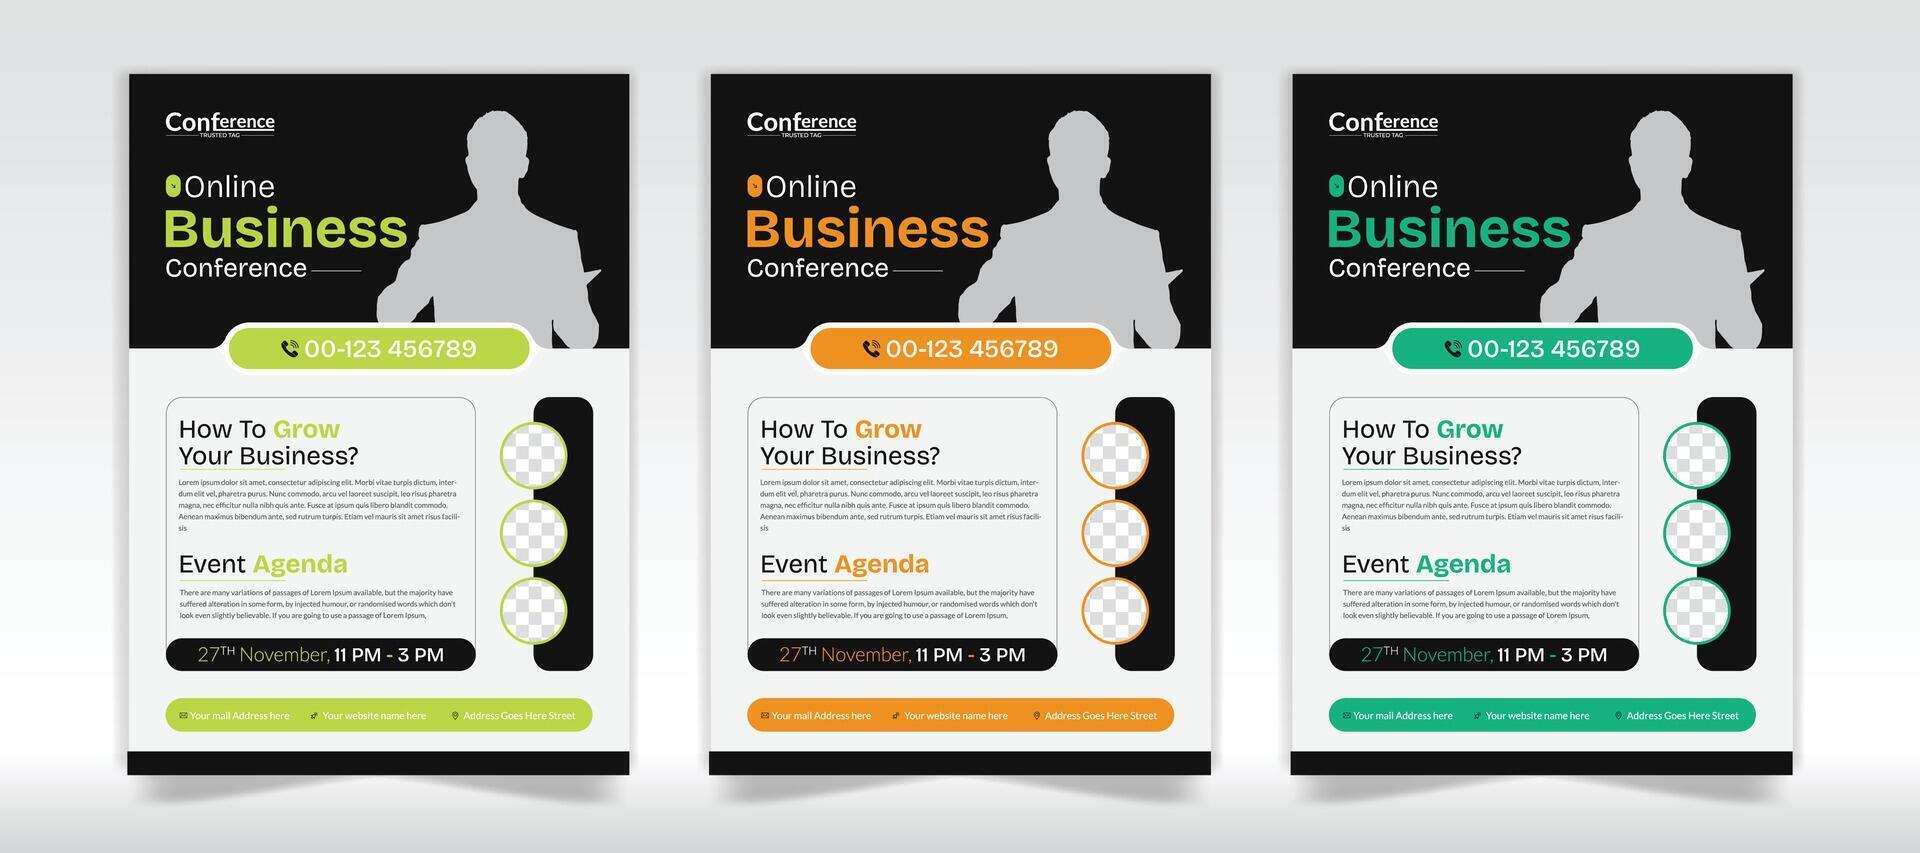 Conference live meeting flyer design and a4 template design vector